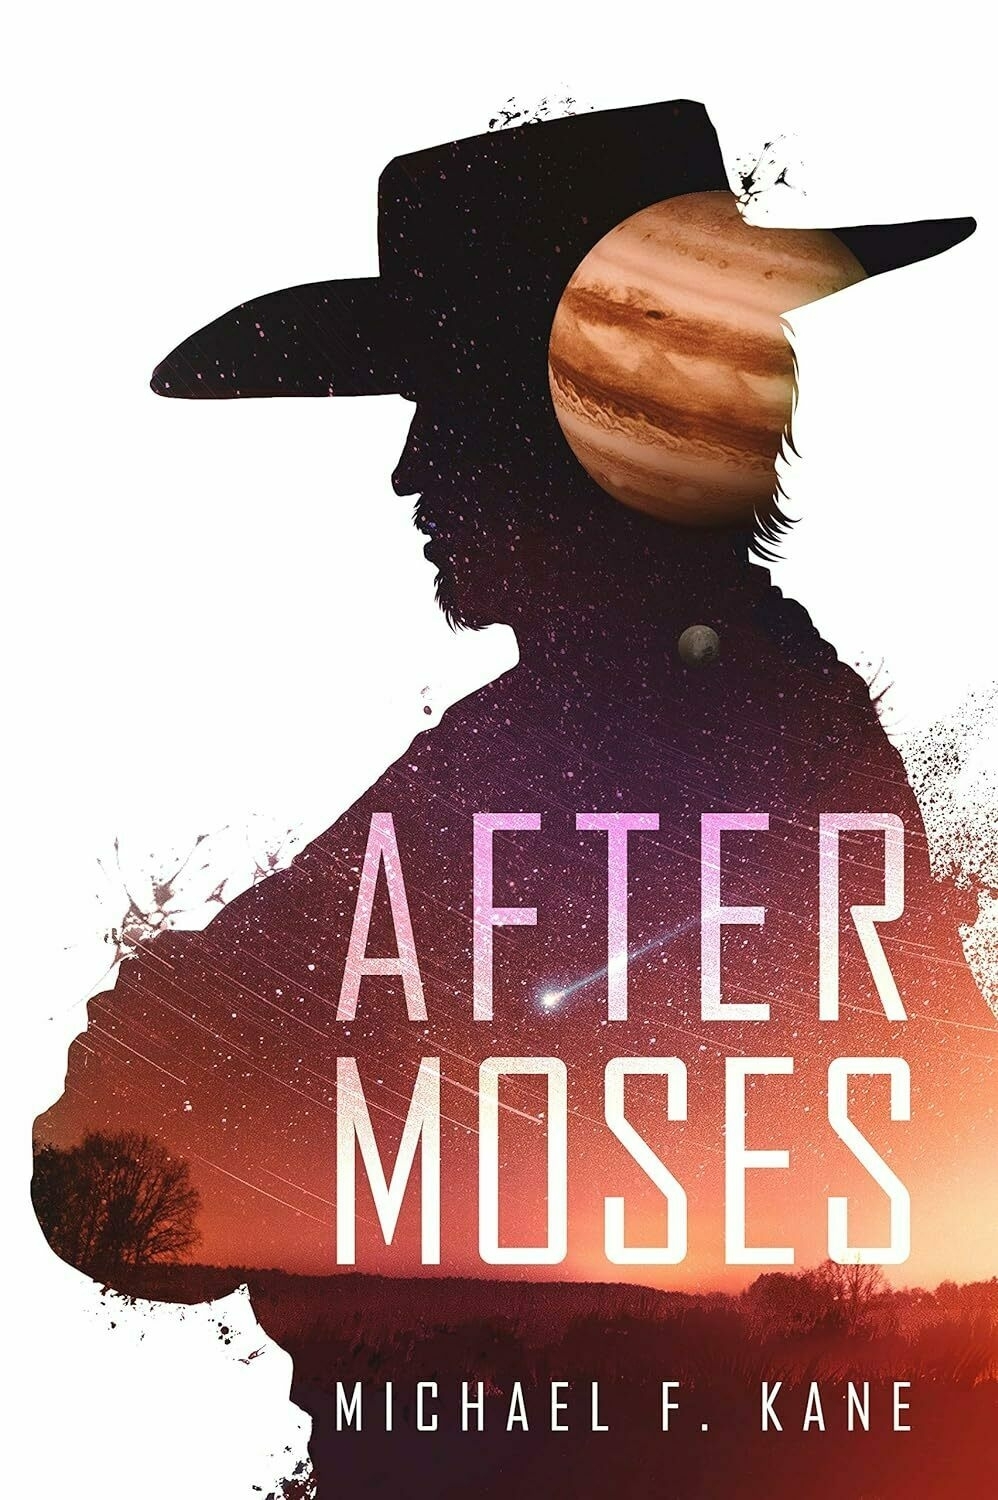 Cover art for Michael Kane's book After Moses